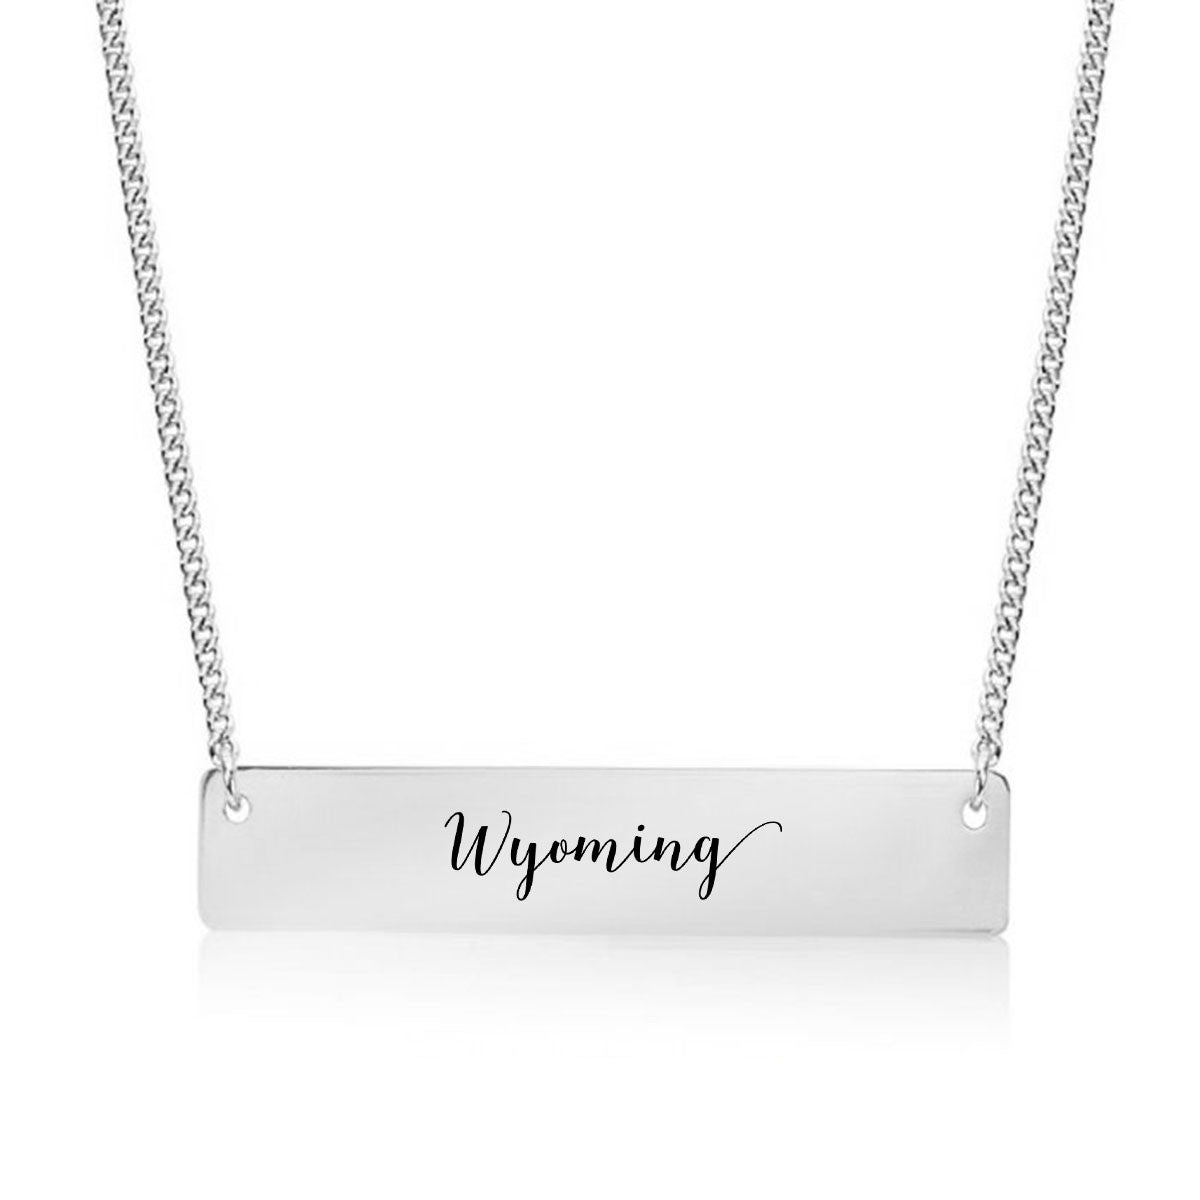 Wyoming Gold / Silver Bar Necklace - pipercleo.com